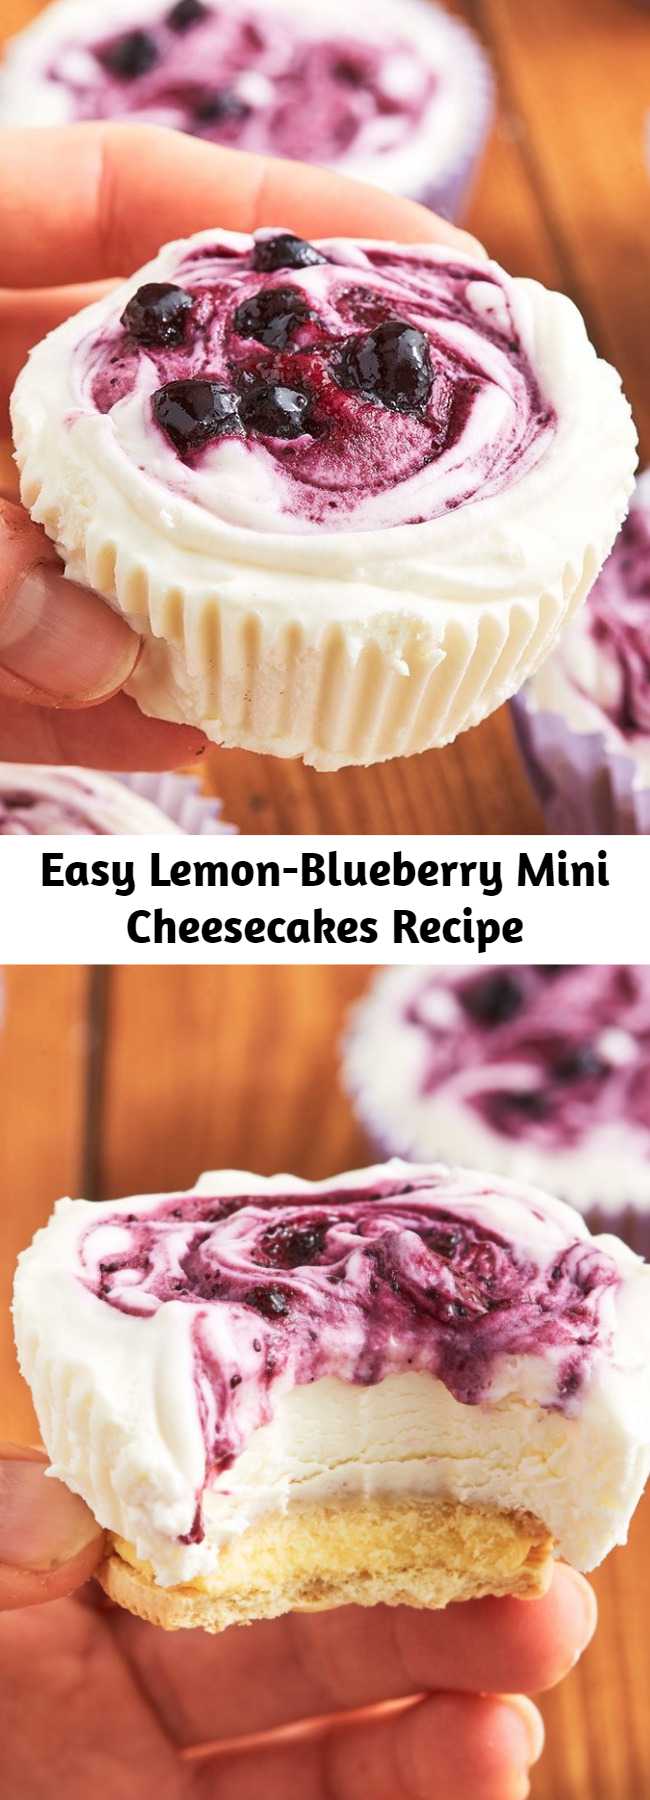 Easy Lemon-Blueberry Mini Cheesecakes Recipe - Mini cheesecakes, MASSIVE flavor. These Lemon Blueberry Mini Cheesecakes are the perfect tiny dessert to satisfy your sweet tooth without going overboard. #lemon #blueberry #lemonblueberry #cheesecakes #minidesserts #cheesecakedesserts #partydesserts